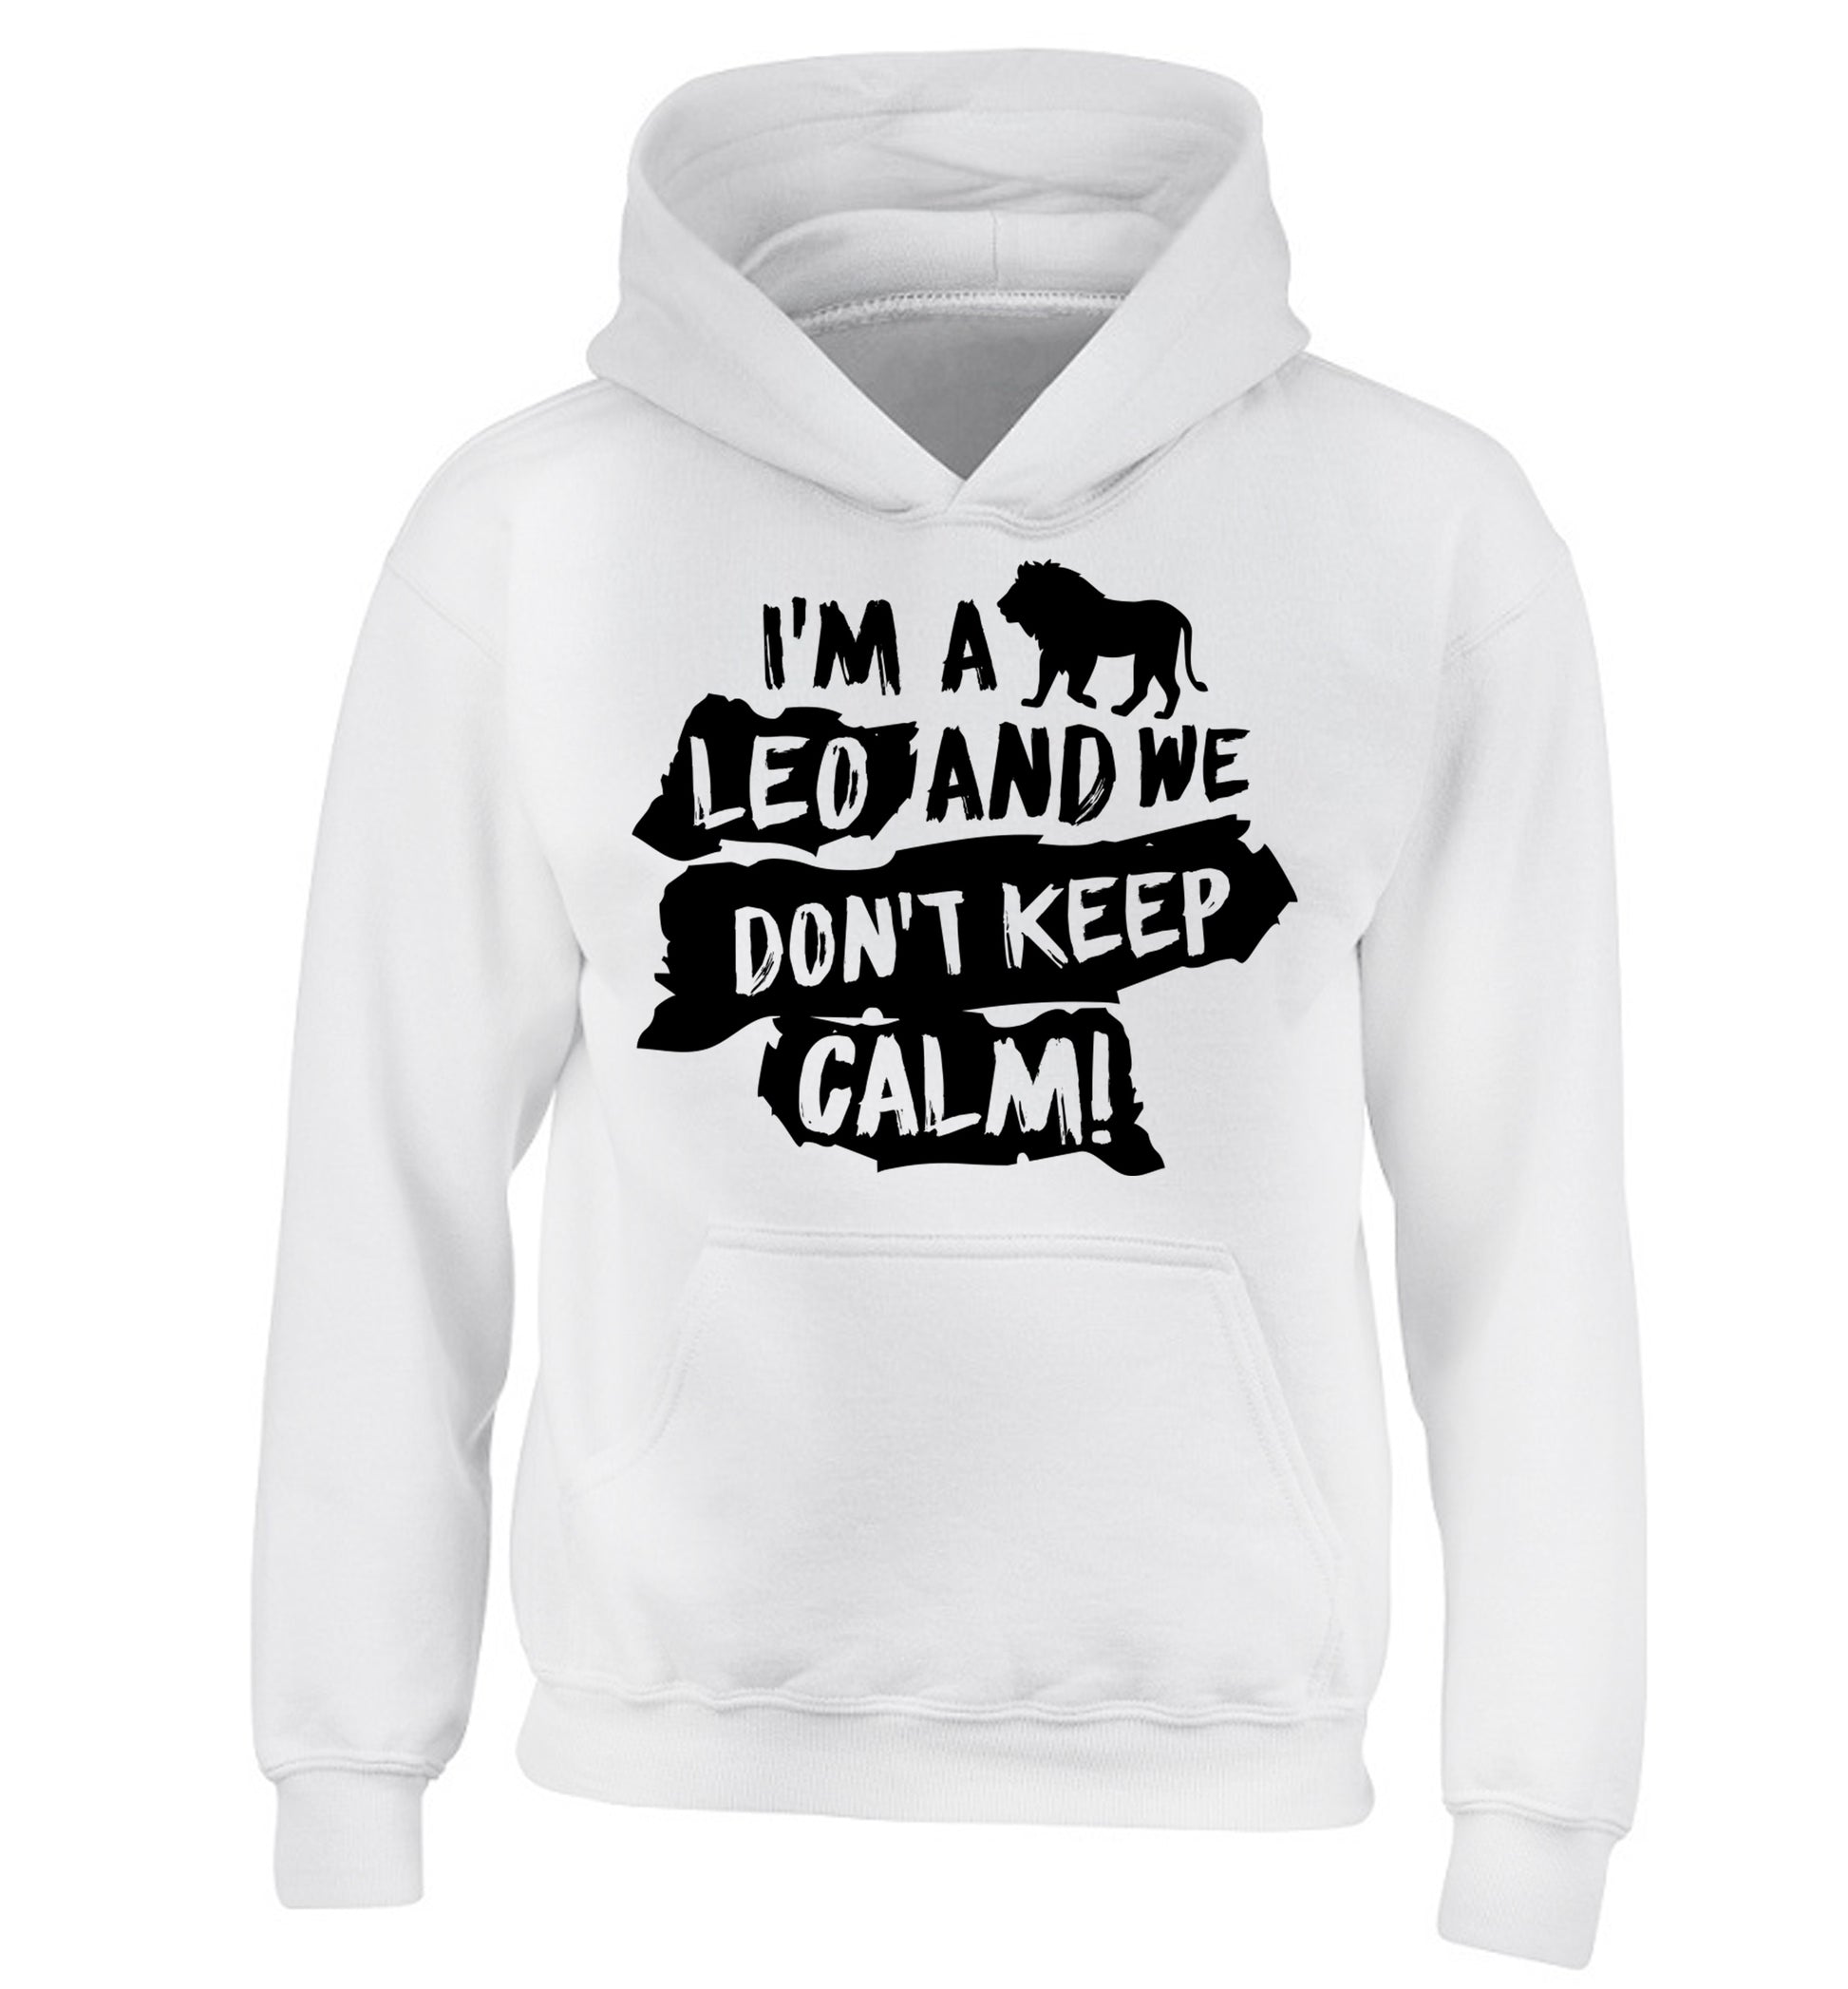 I'm a leo and we don't keep calm! children's white hoodie 12-13 Years